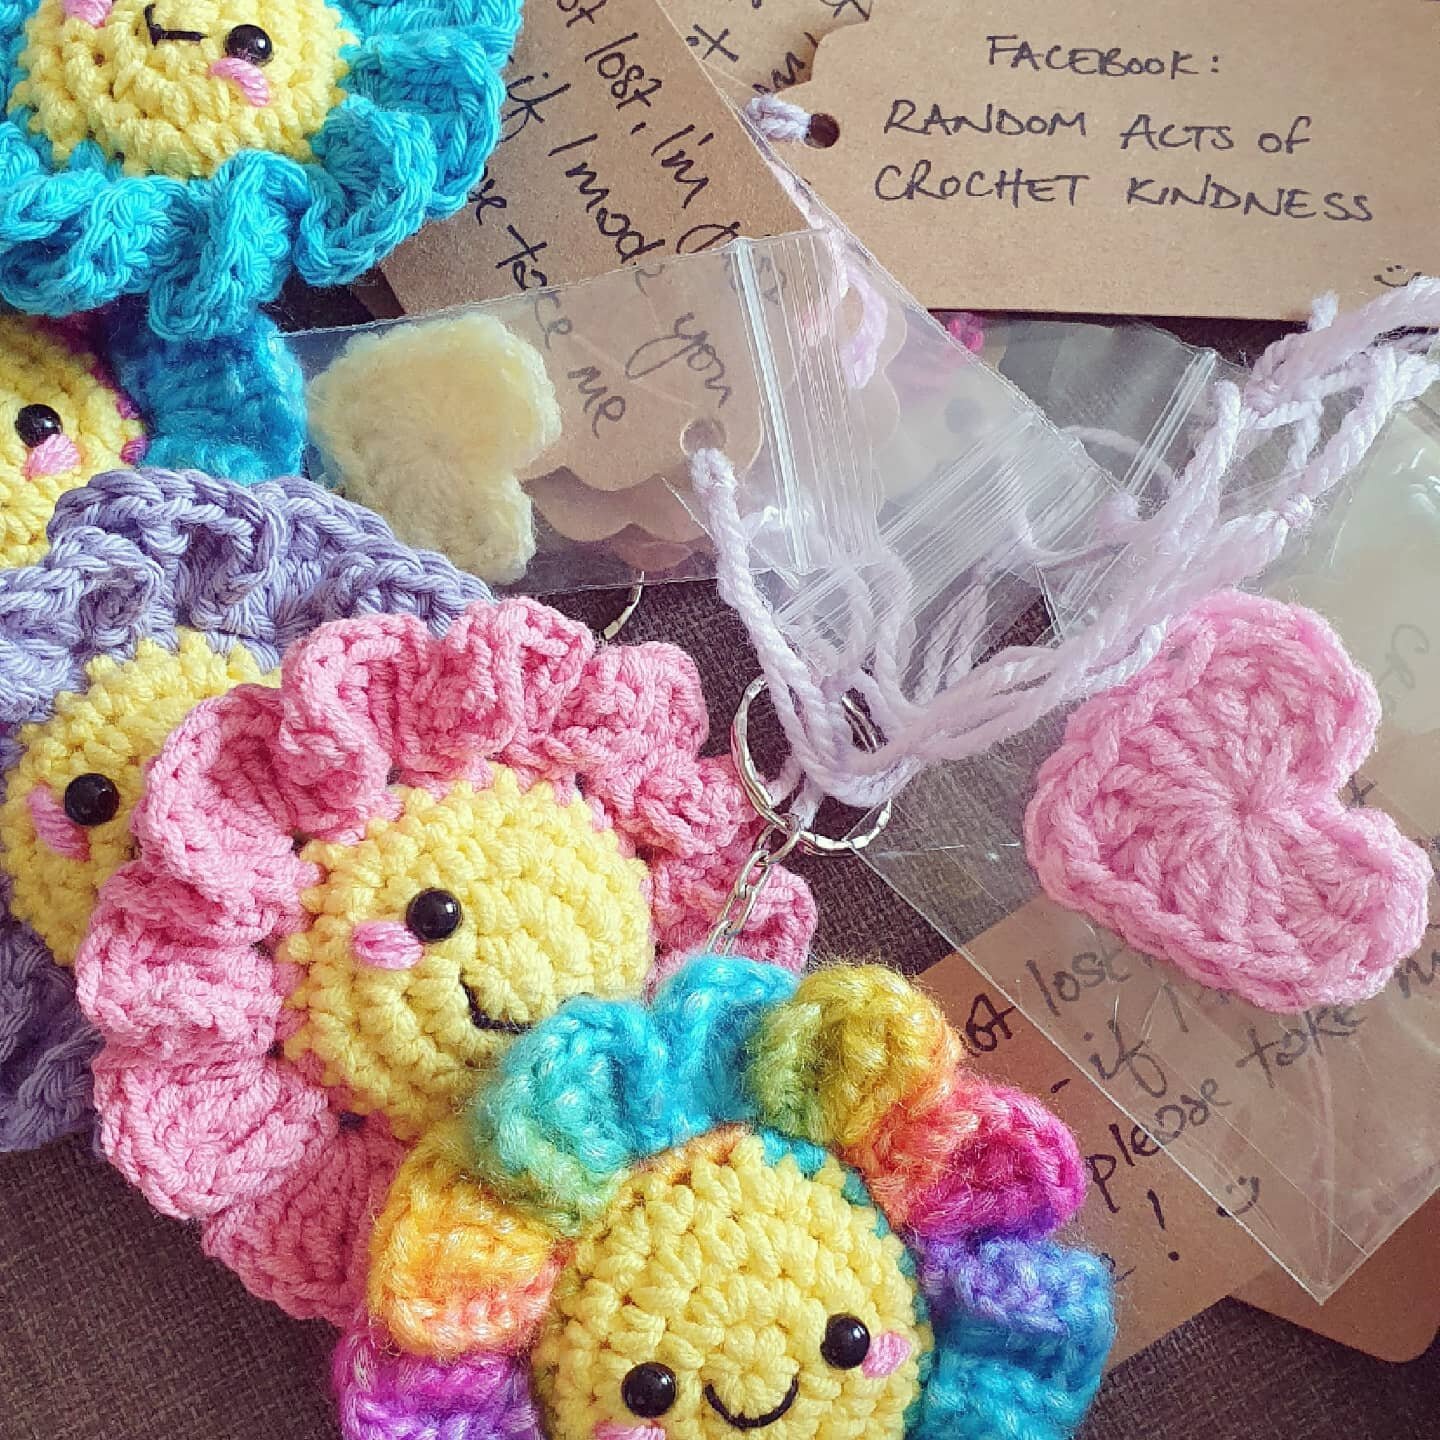 It's that time of year again! Sun's out so it's #randomactsofcrochetkindness time - huge thanks as always to @crochyay for being the inspiration behind the movement 🥰

#spreadkindness